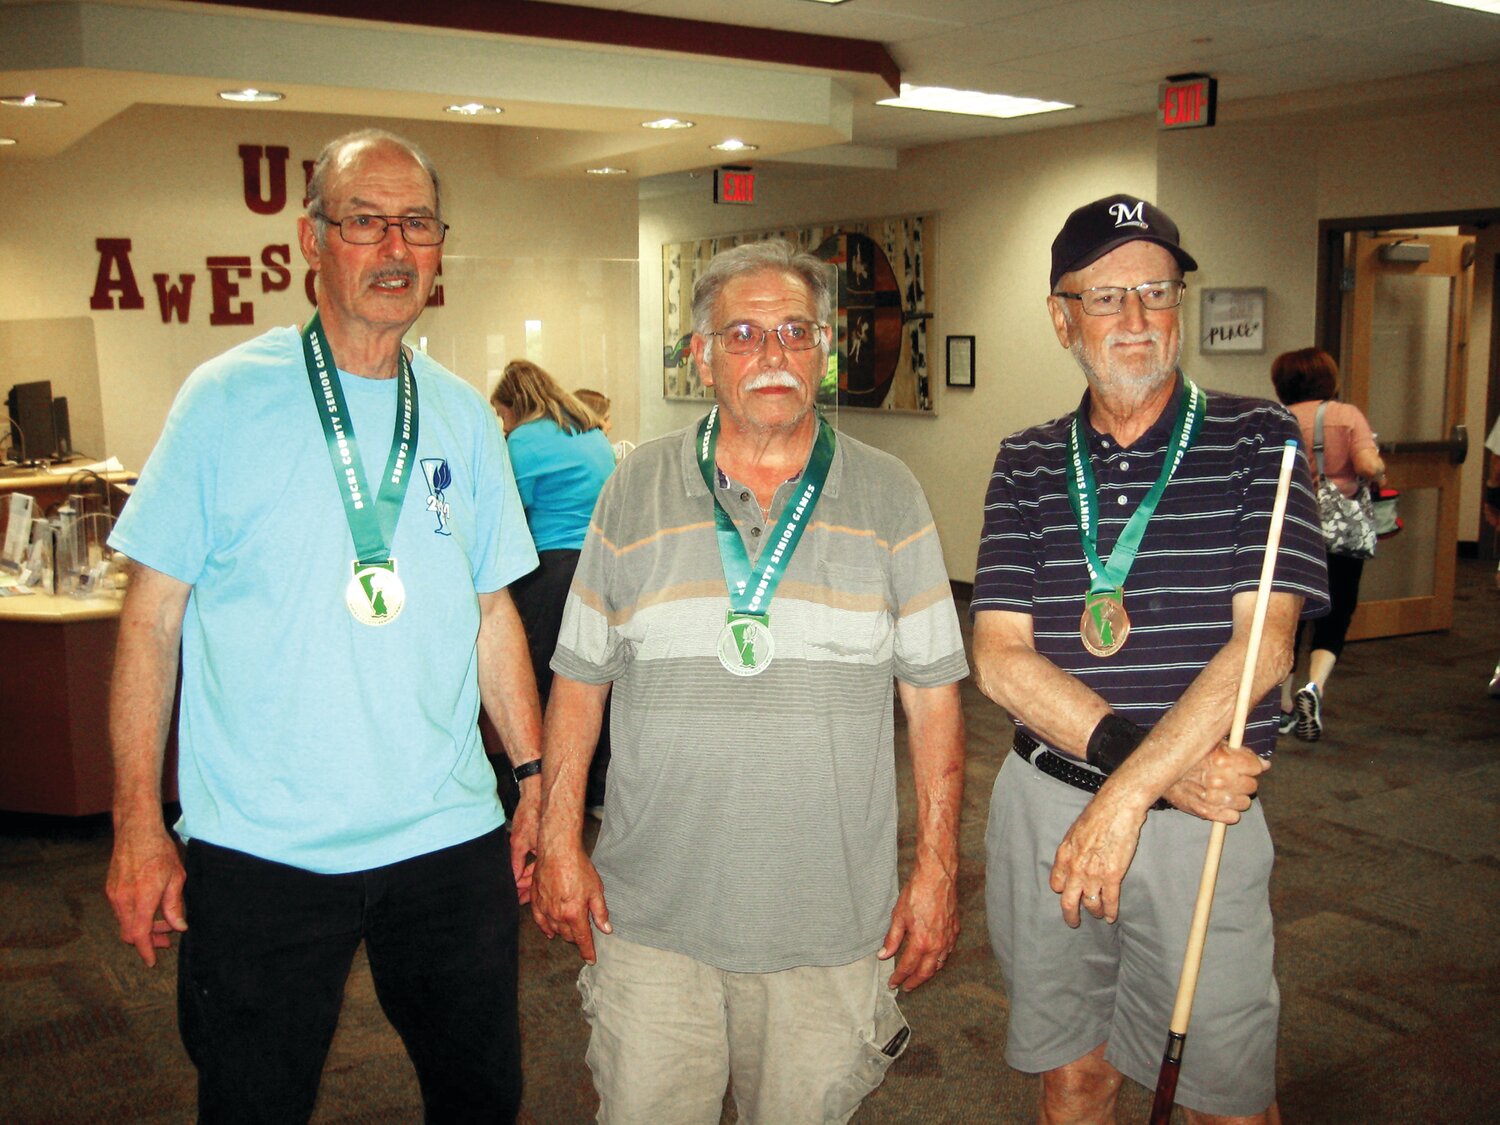 Bucks County Senior Games men’s age 70-79 billiards medalists, from left:  Dale Carlen, gold; Dominick DiSalvo, silver, and George Stevenson, bronze.